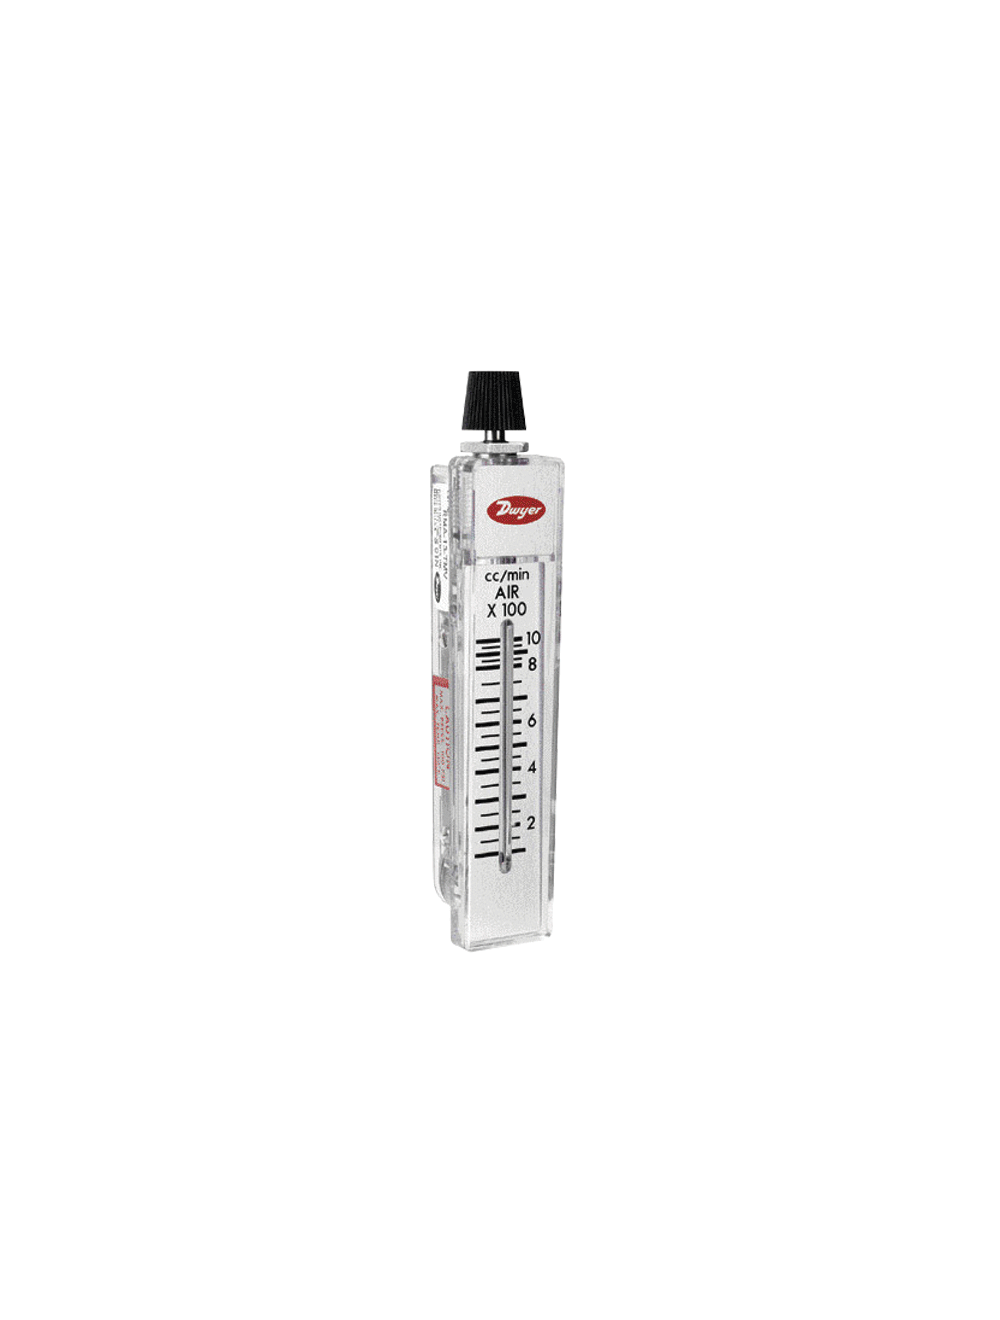 Details about   NEW DWYER SERIES RMC RATE-MASTER FLOWMETER 3,675,481 